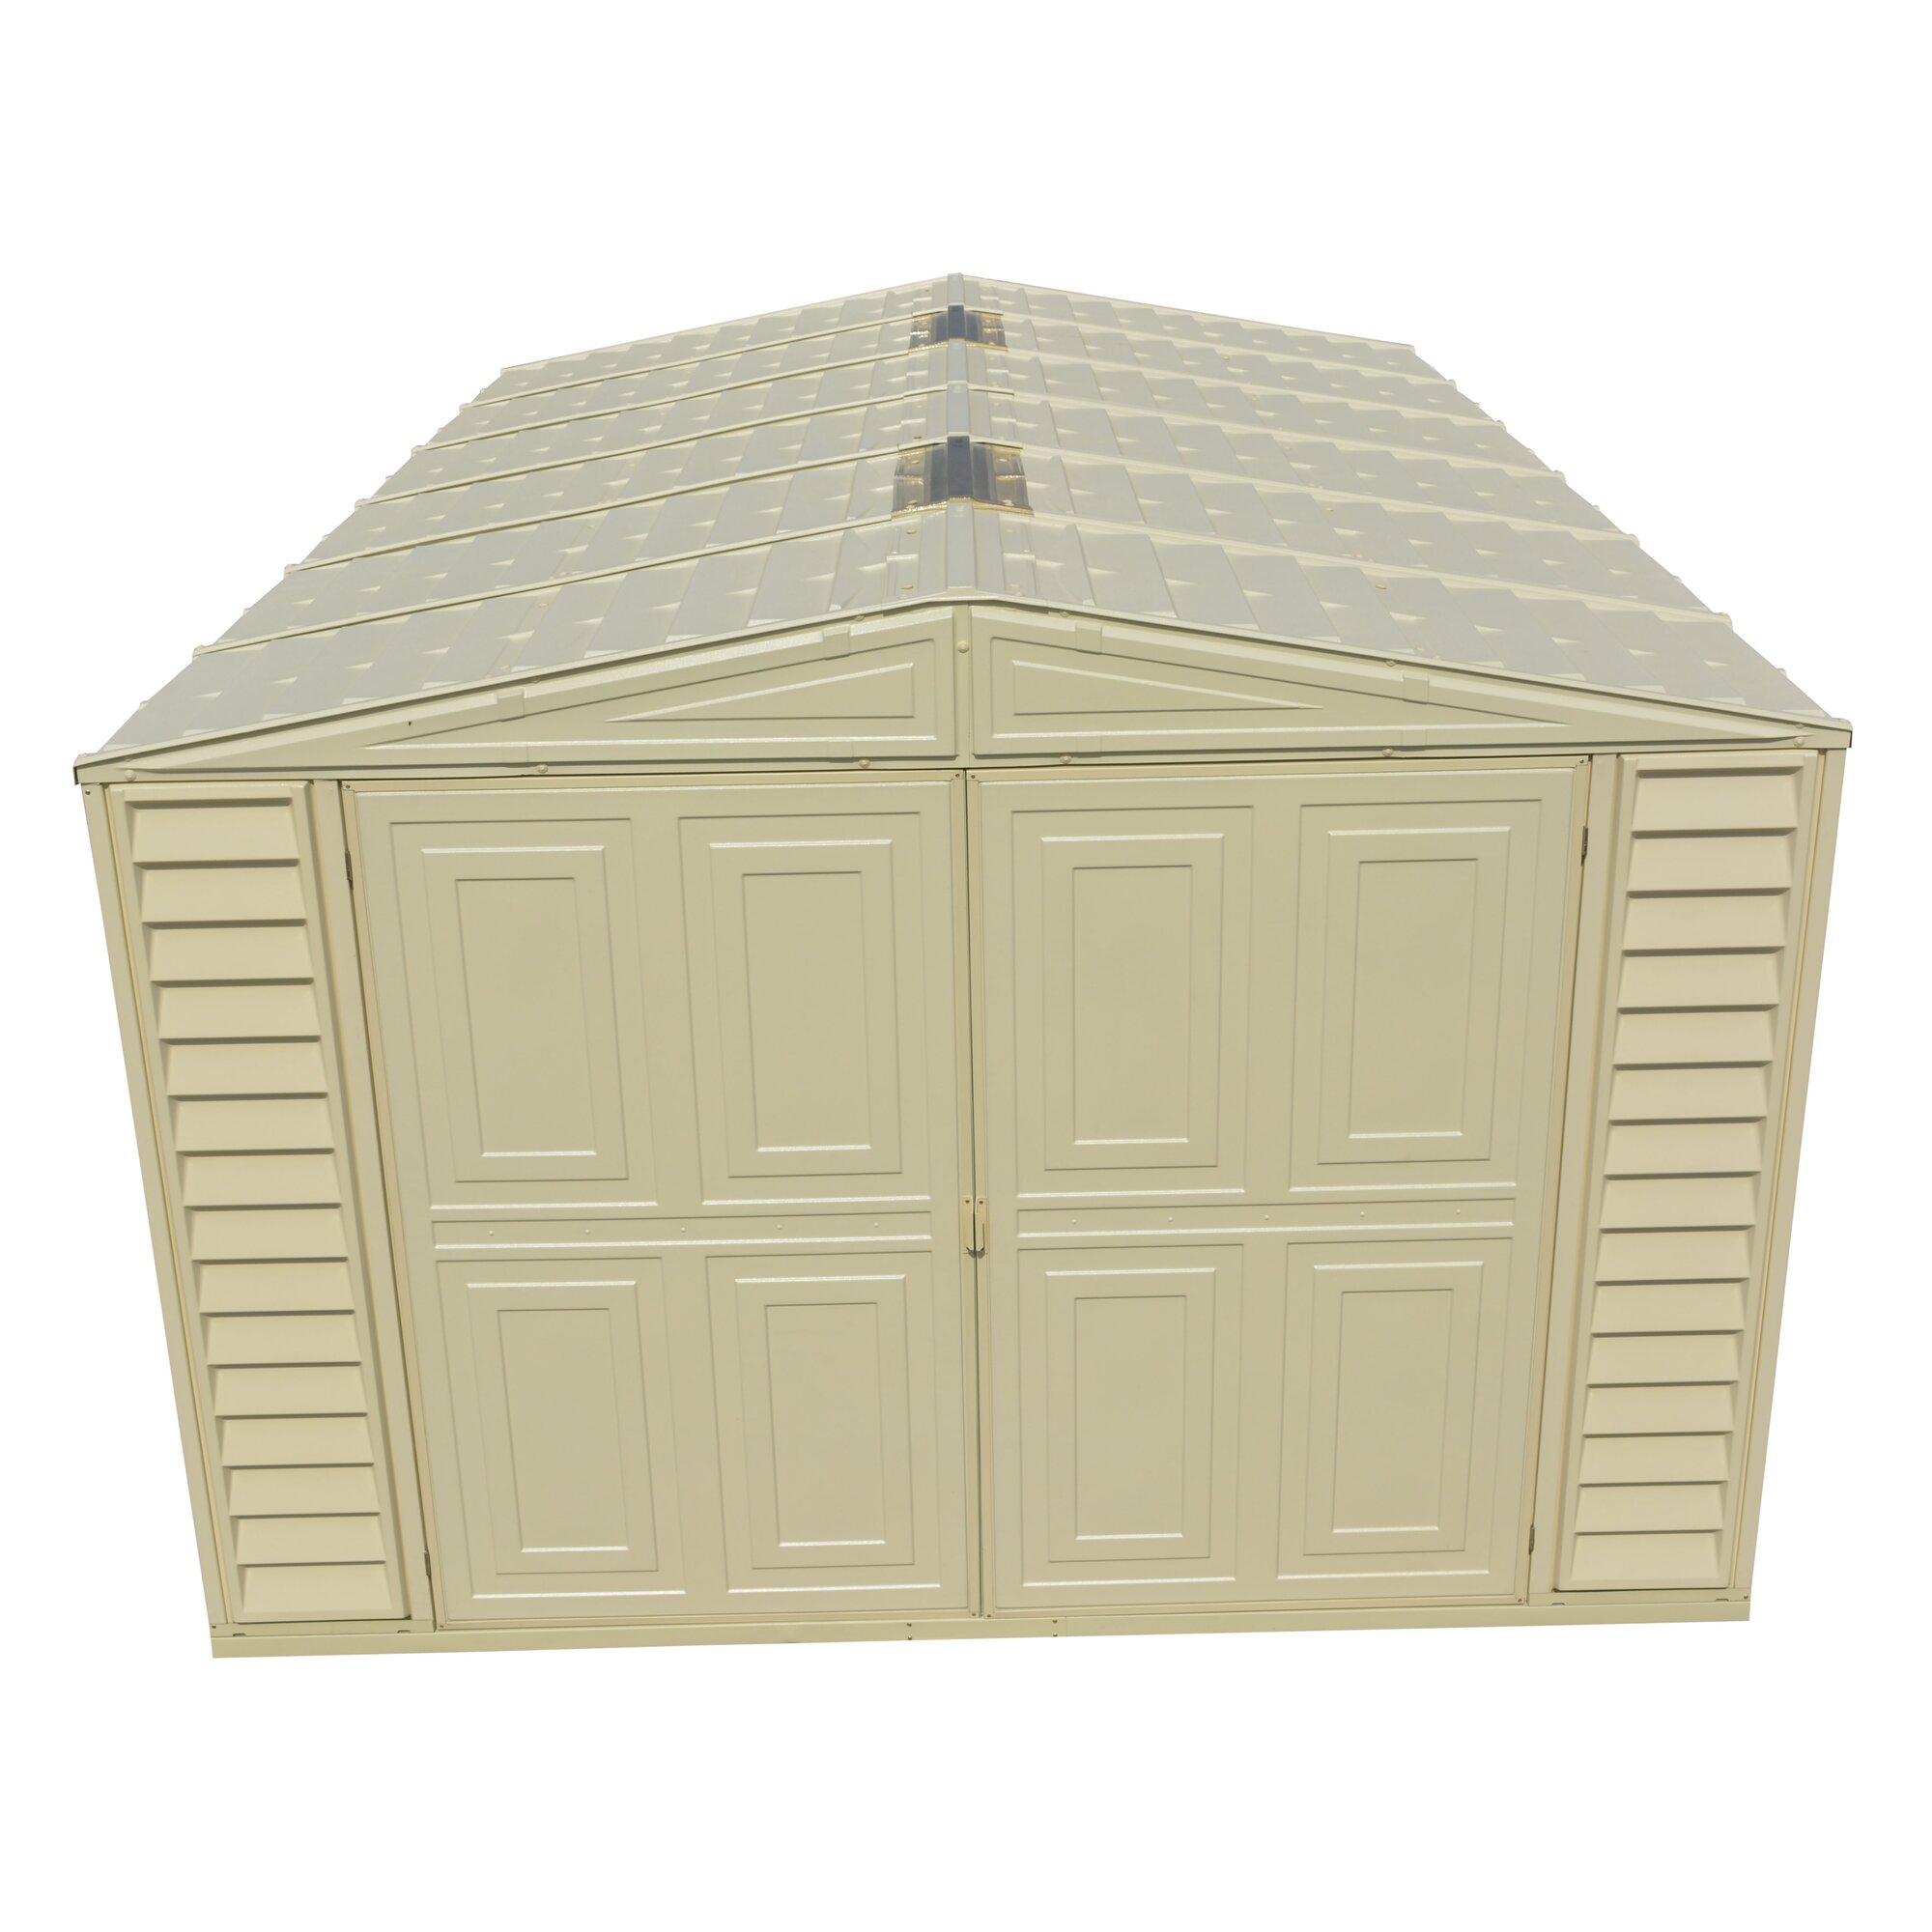 Duramax 10 ft. W x 18 ft. D Plastic Garage Shed &amp; Reviews 